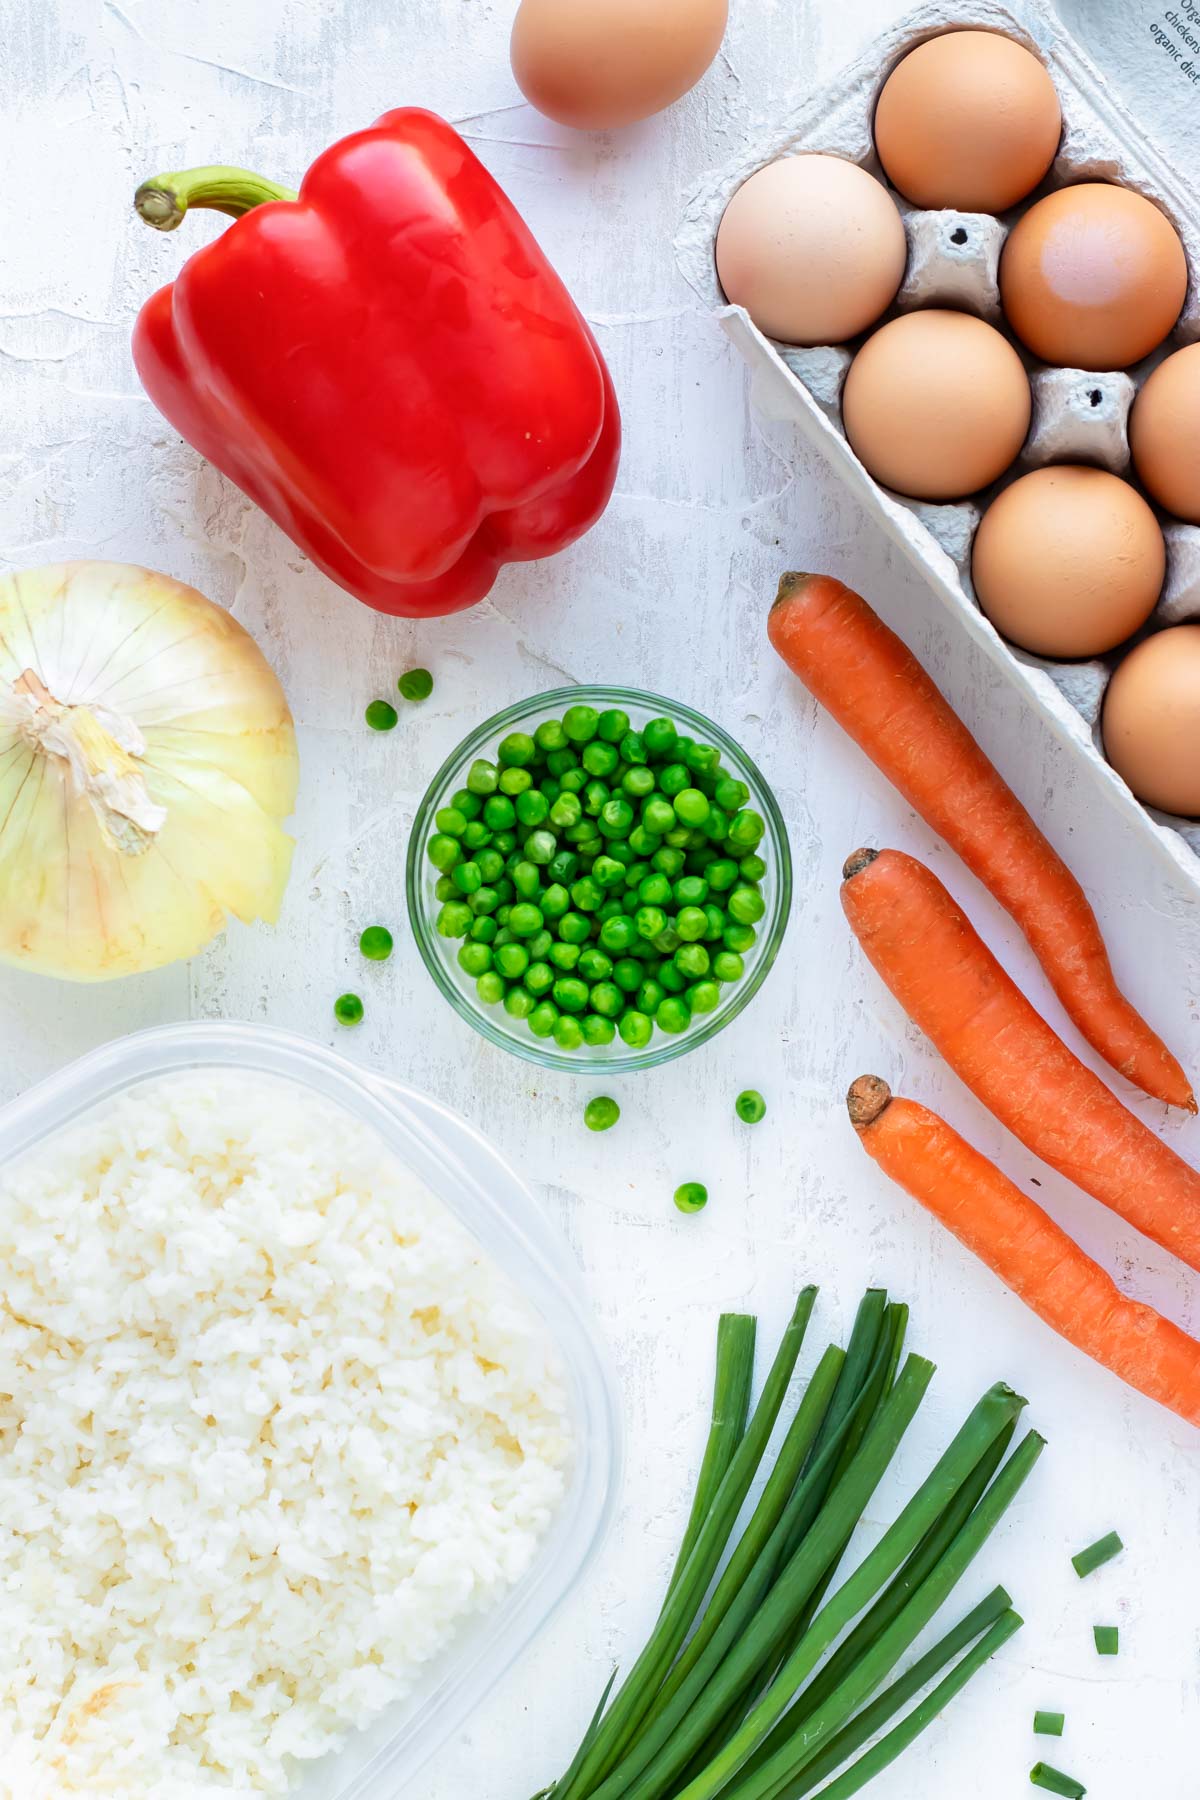 Eggs, rice, red bell pepper, onion, carrots, and green onion arranged on a white countertop.